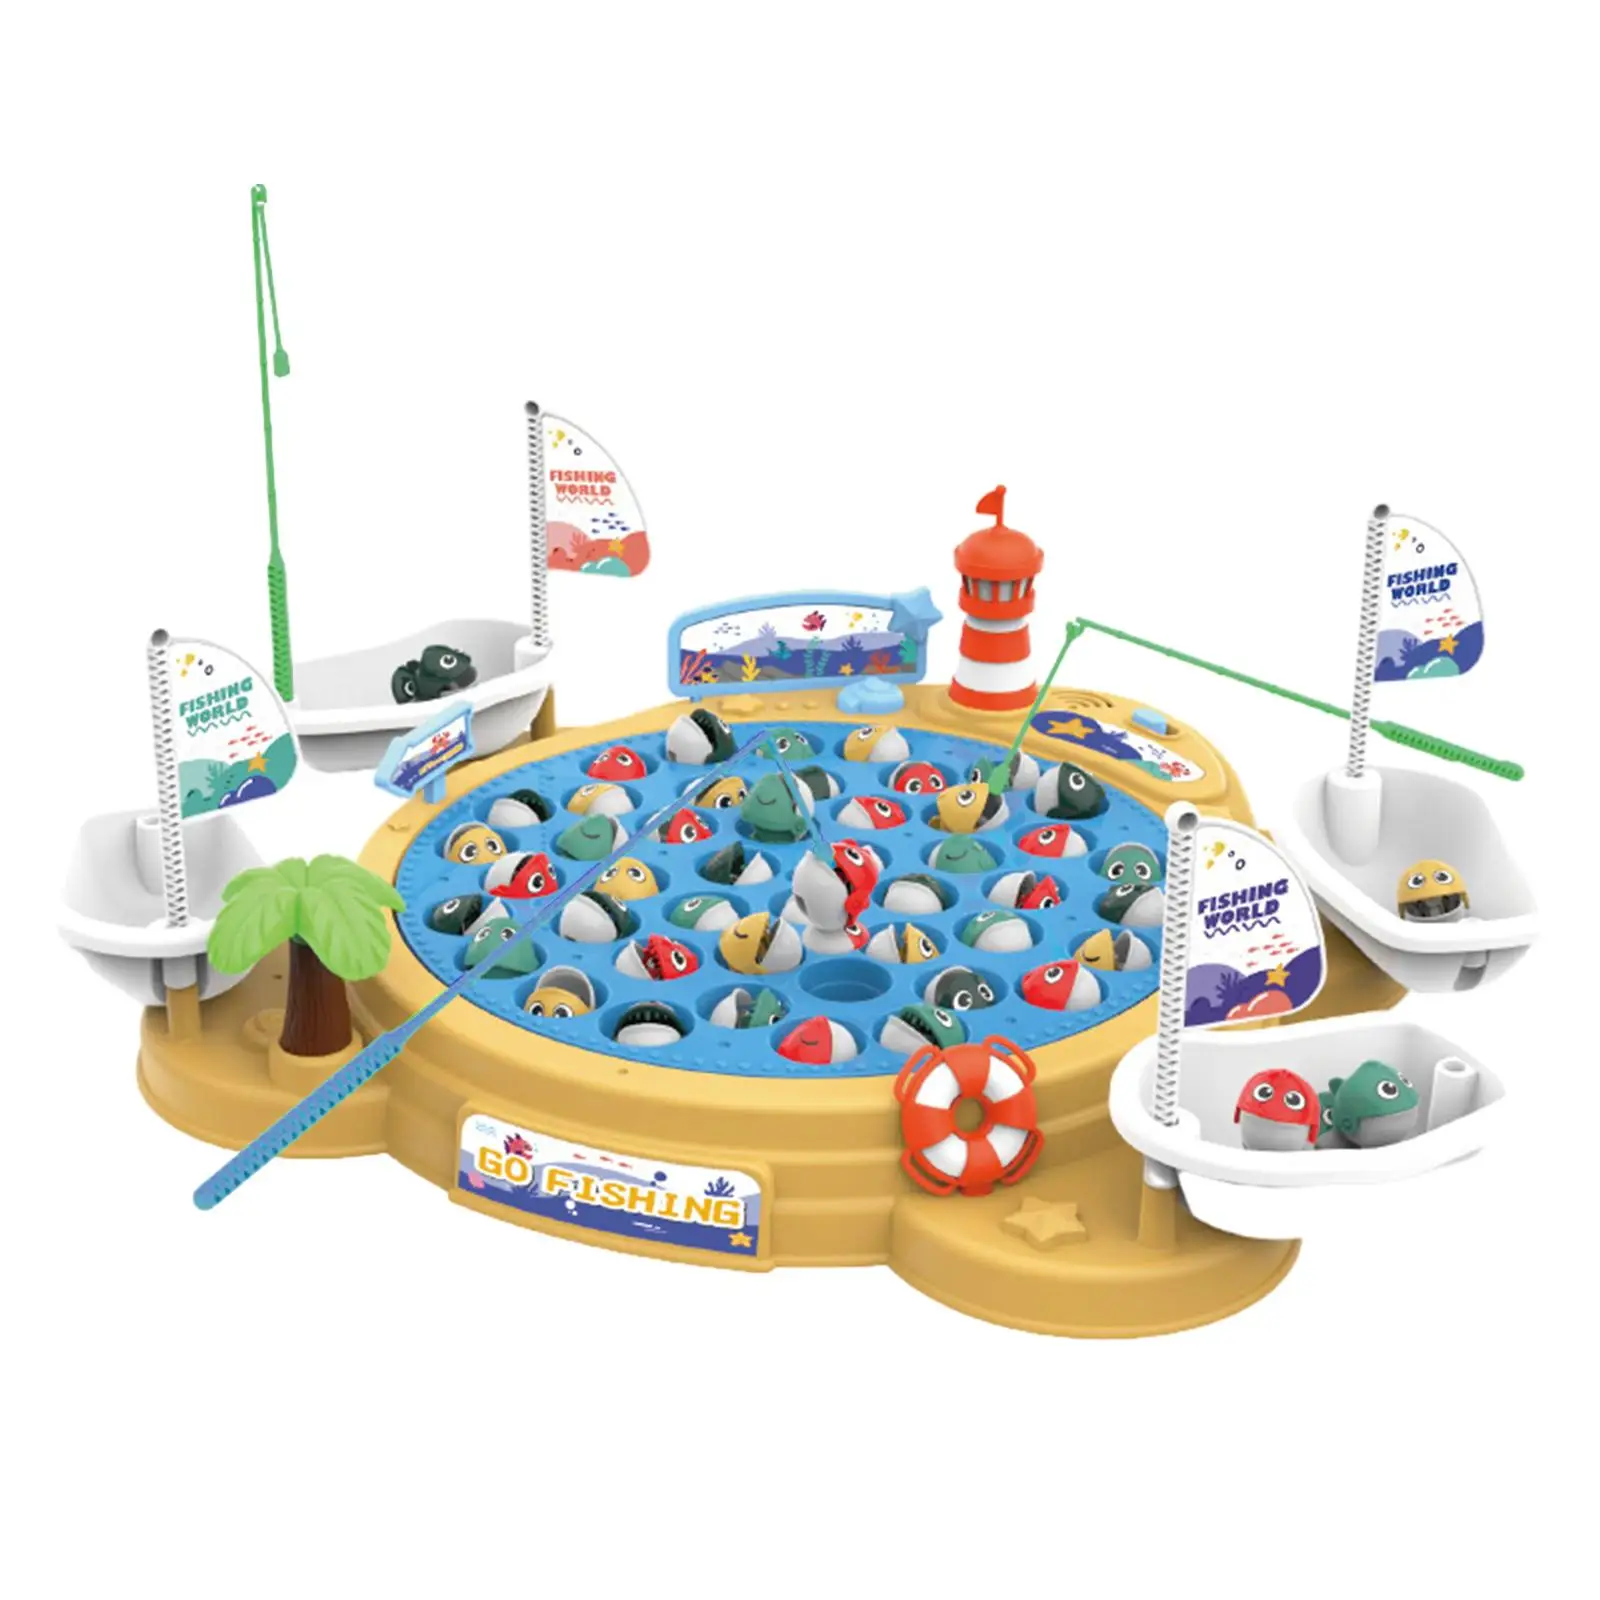 Fishing Game Toy Teaching Aid including Fishes and Fishing Poles Fishing Game Play Set for Toddlers Boys Girls Birthday Gifts